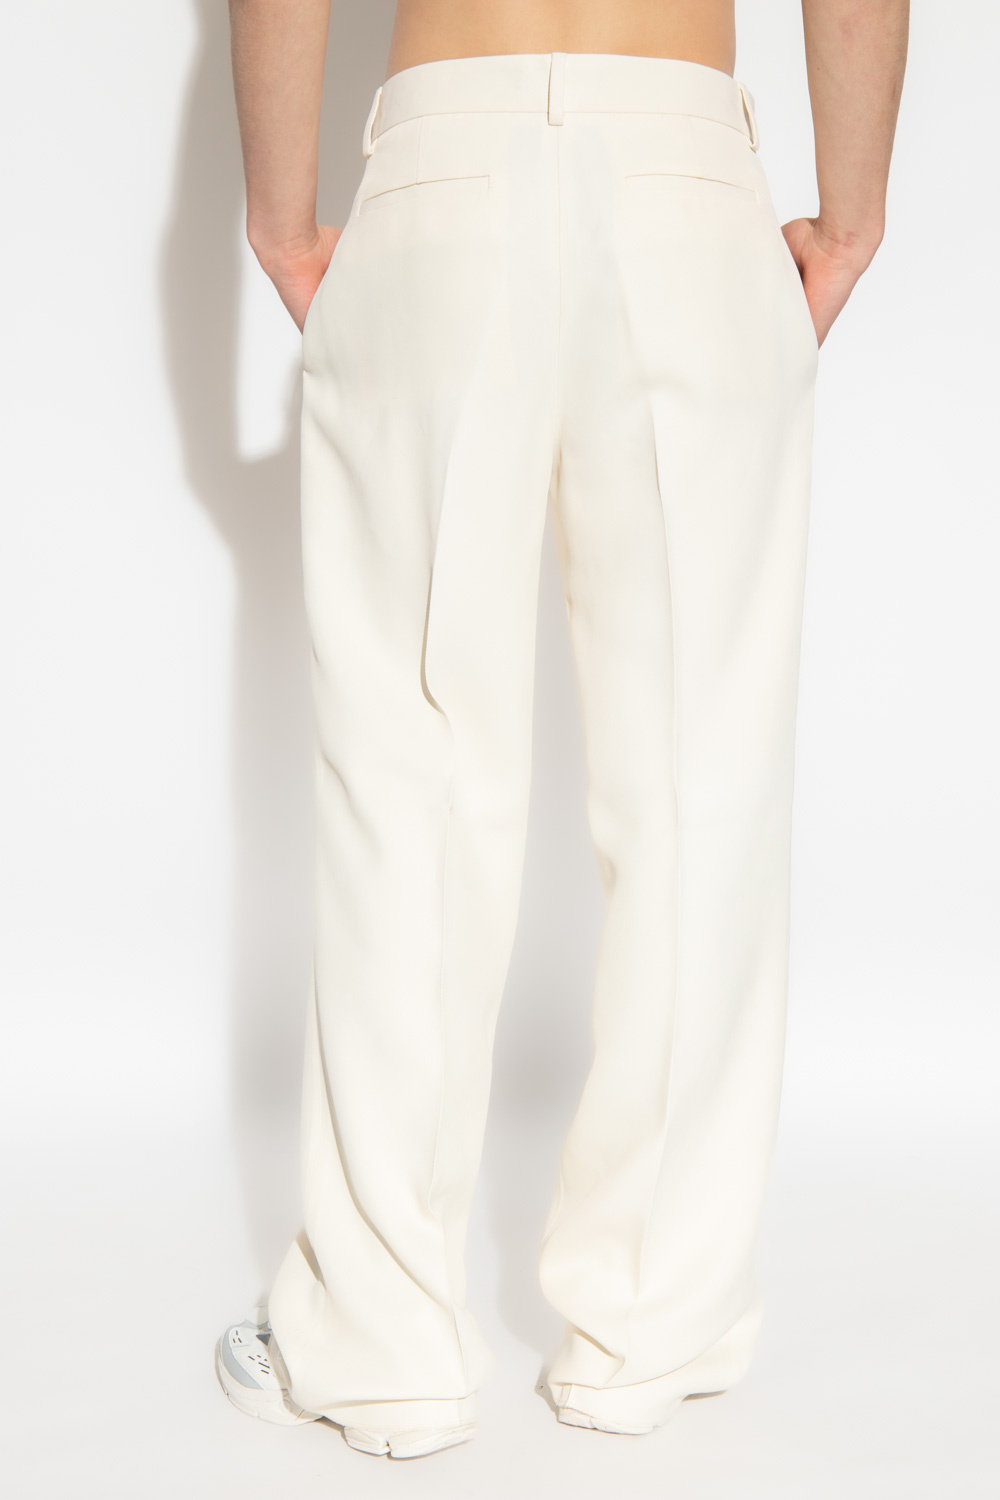 Amiri Trousers with wide legs